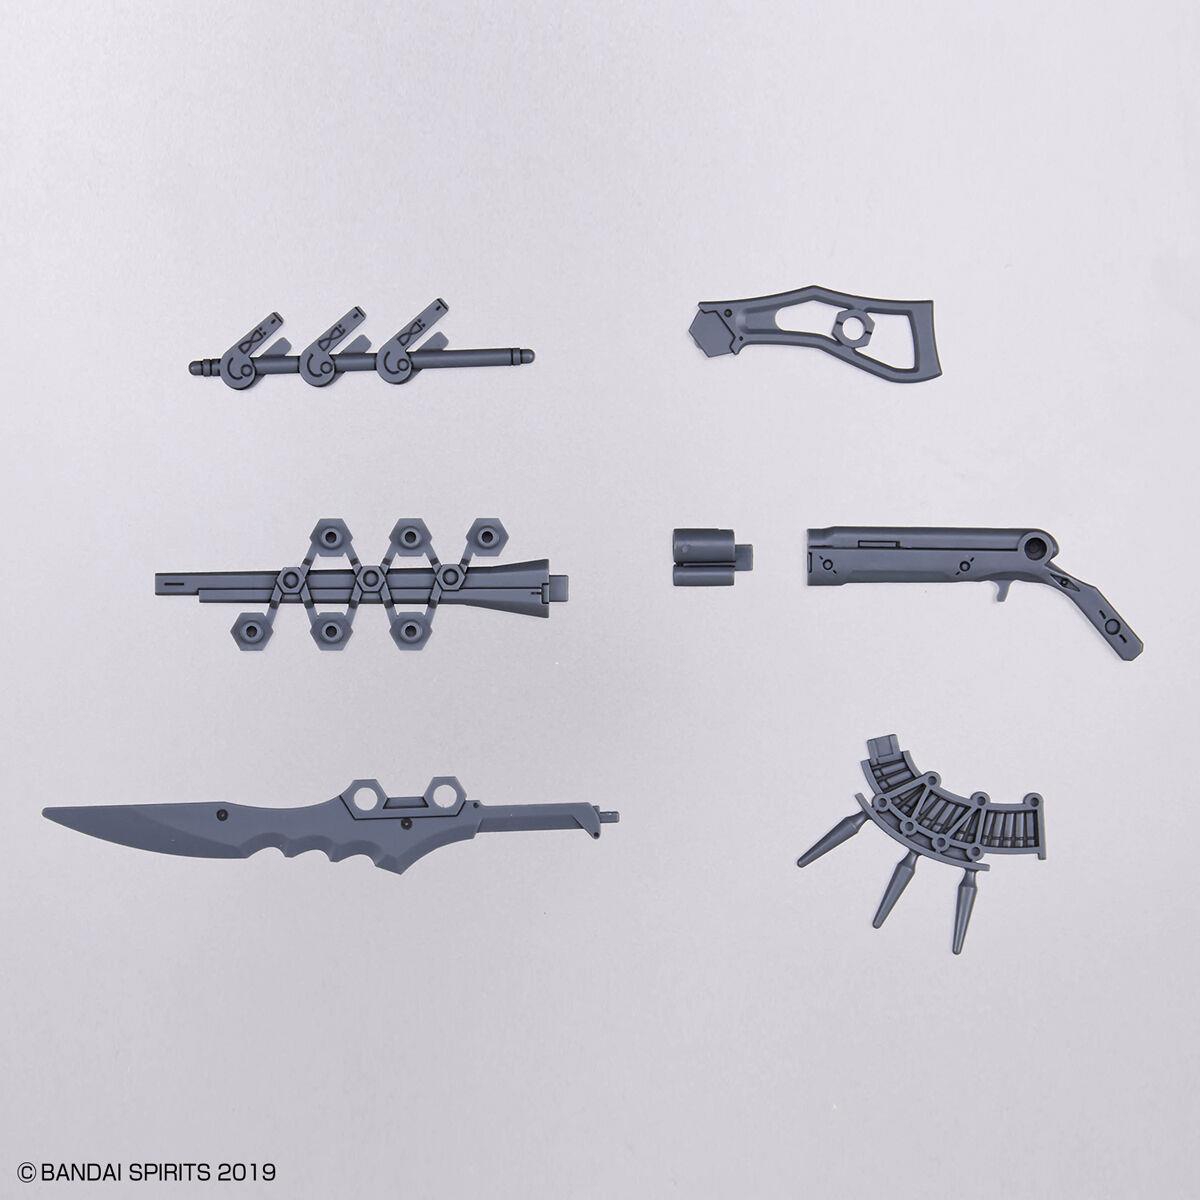 designing weapons, which of these weapons do you find most interesting? :  r/ImaginaryWarhammer